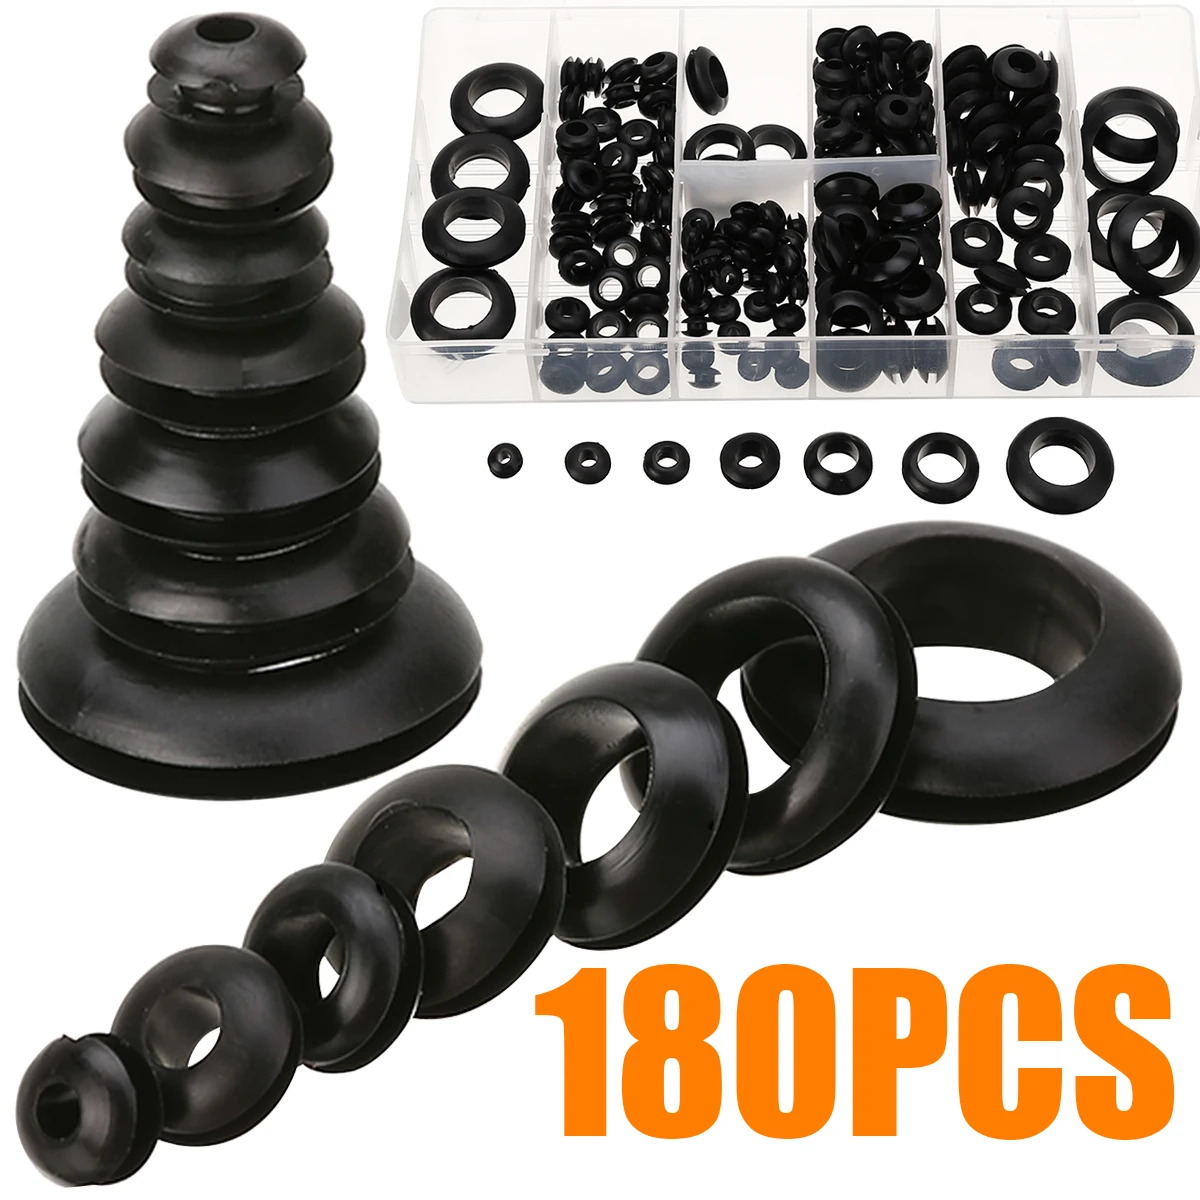 Plug and Cable 7/16 1 7/8 5/16 3/8 1/2 5/8 Bestgle 180pcs Rubber Grommet Assortment Kit Electrical Wire Gasket O Ring Washer Set for Wire 1/4